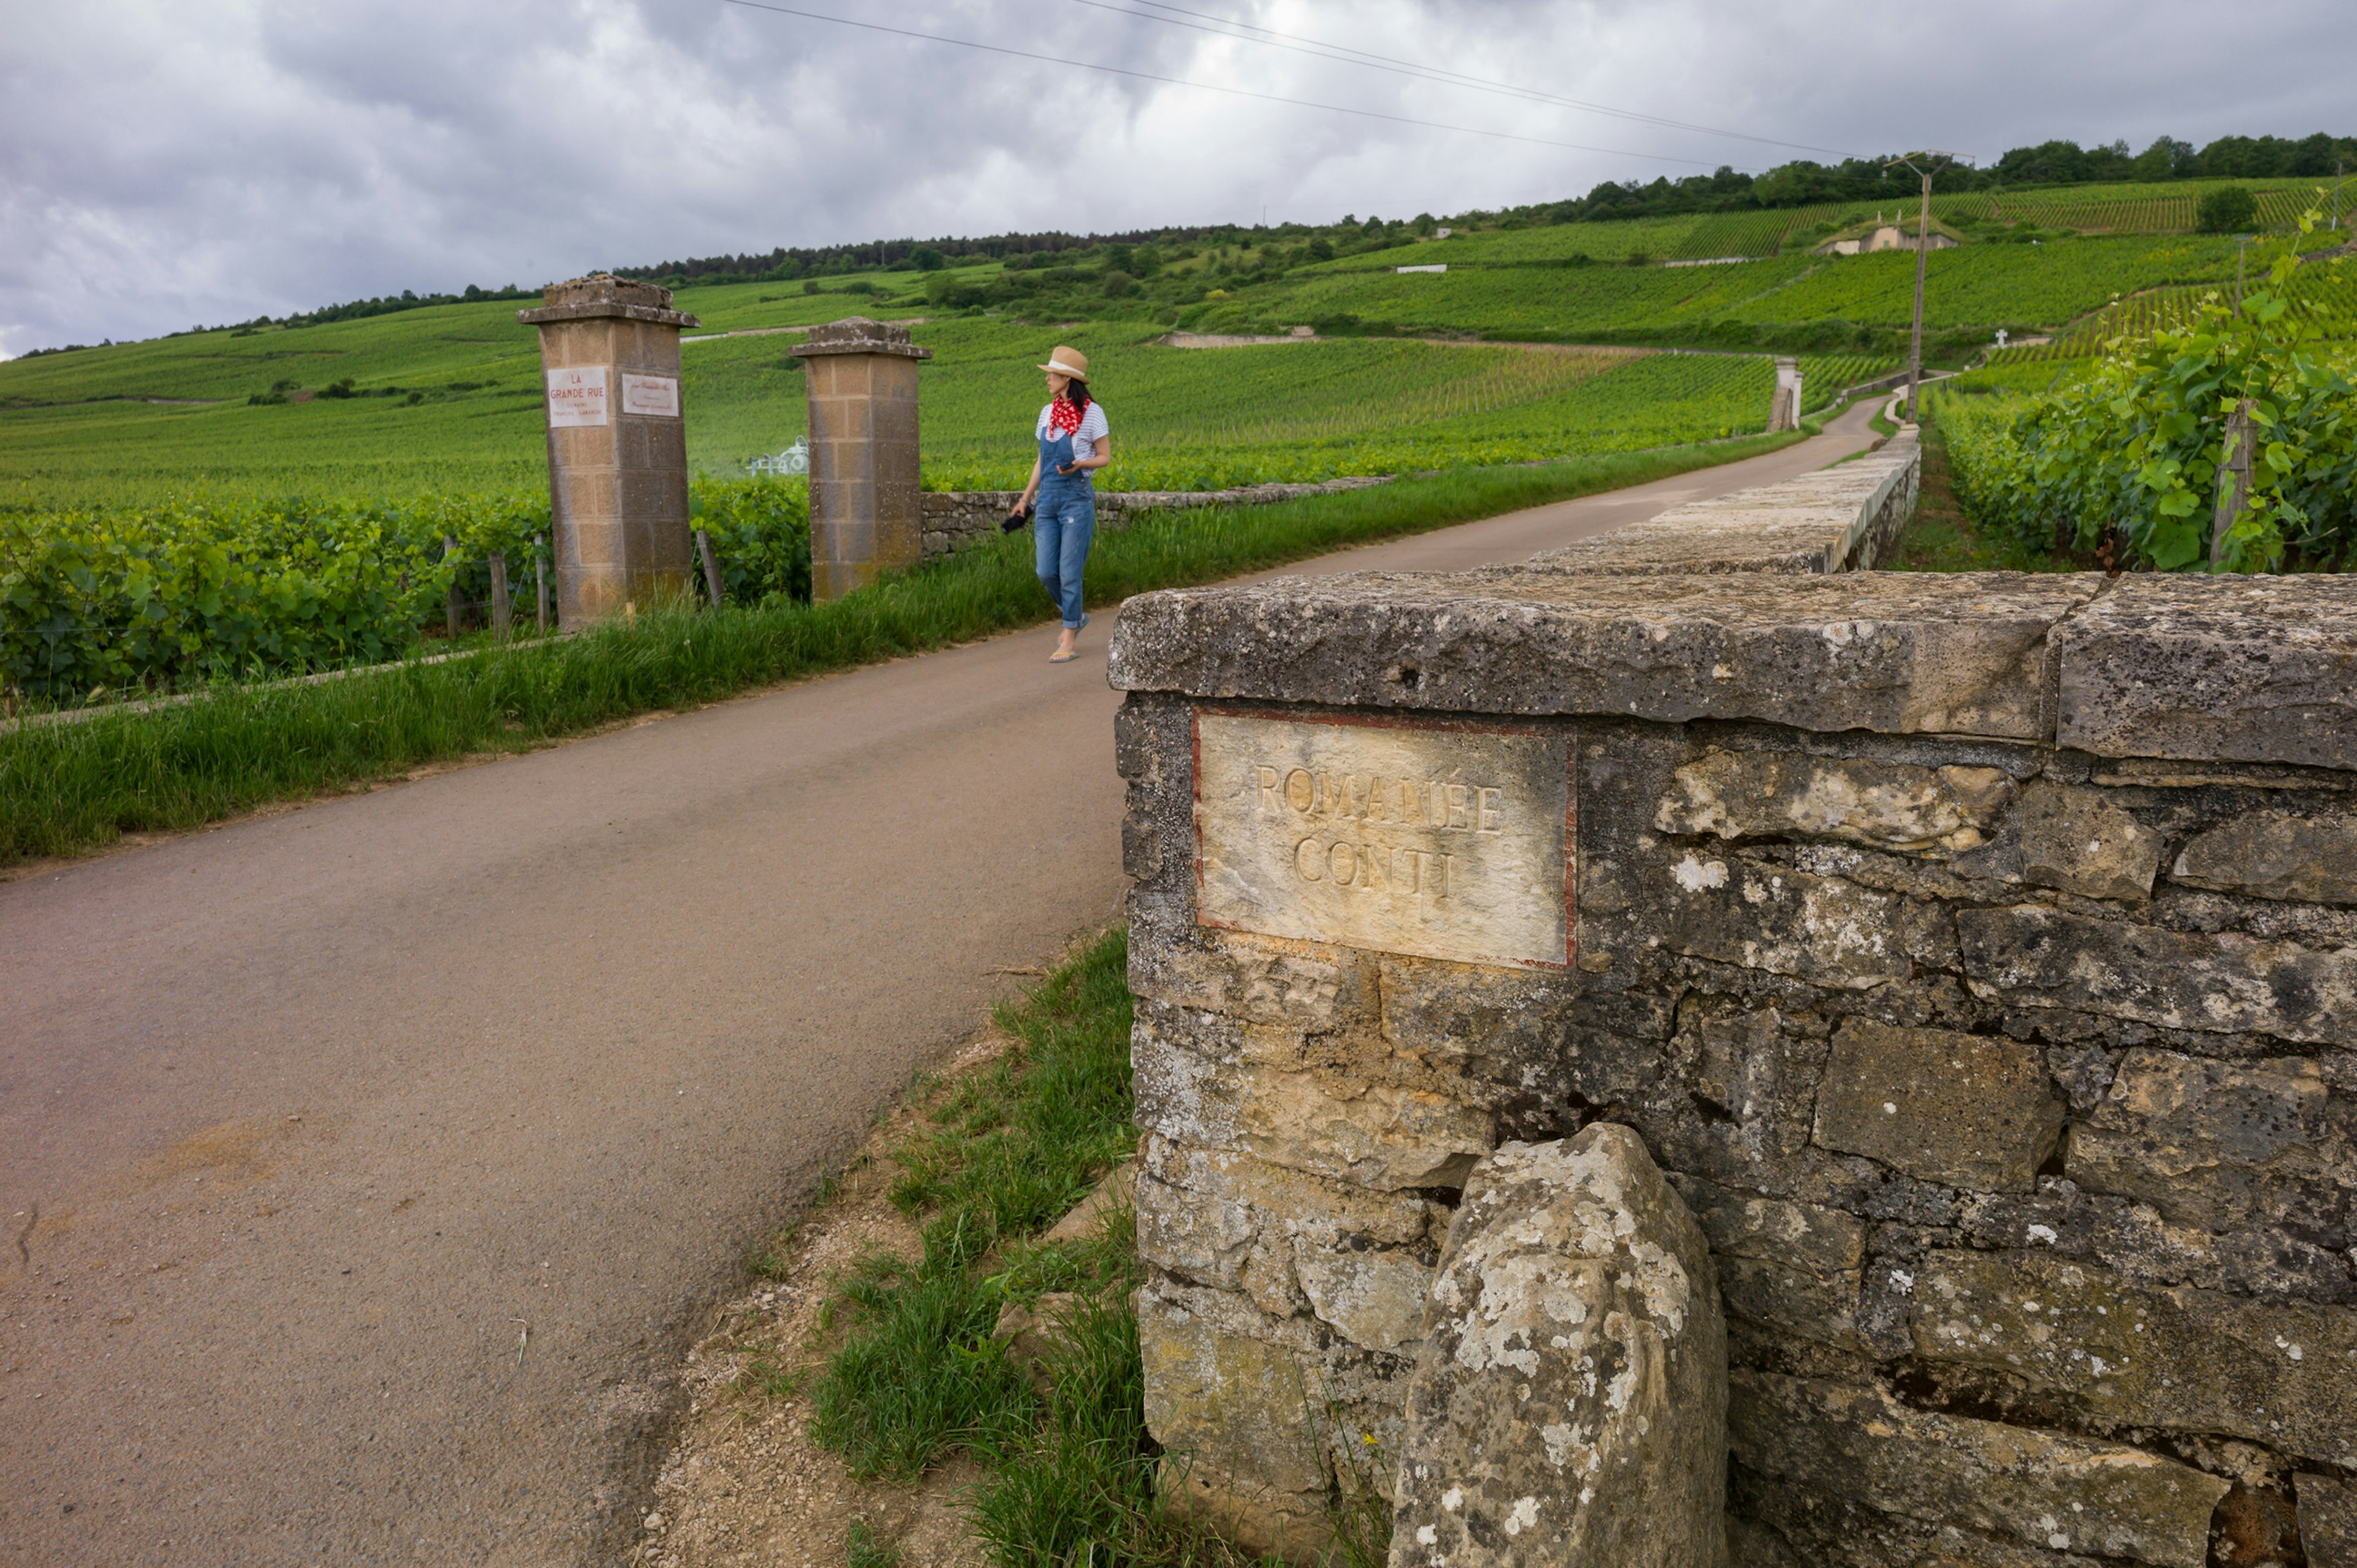 The world's famous Romanee conti vineyard with a vineyard marker on the wall in Burgundy, France.